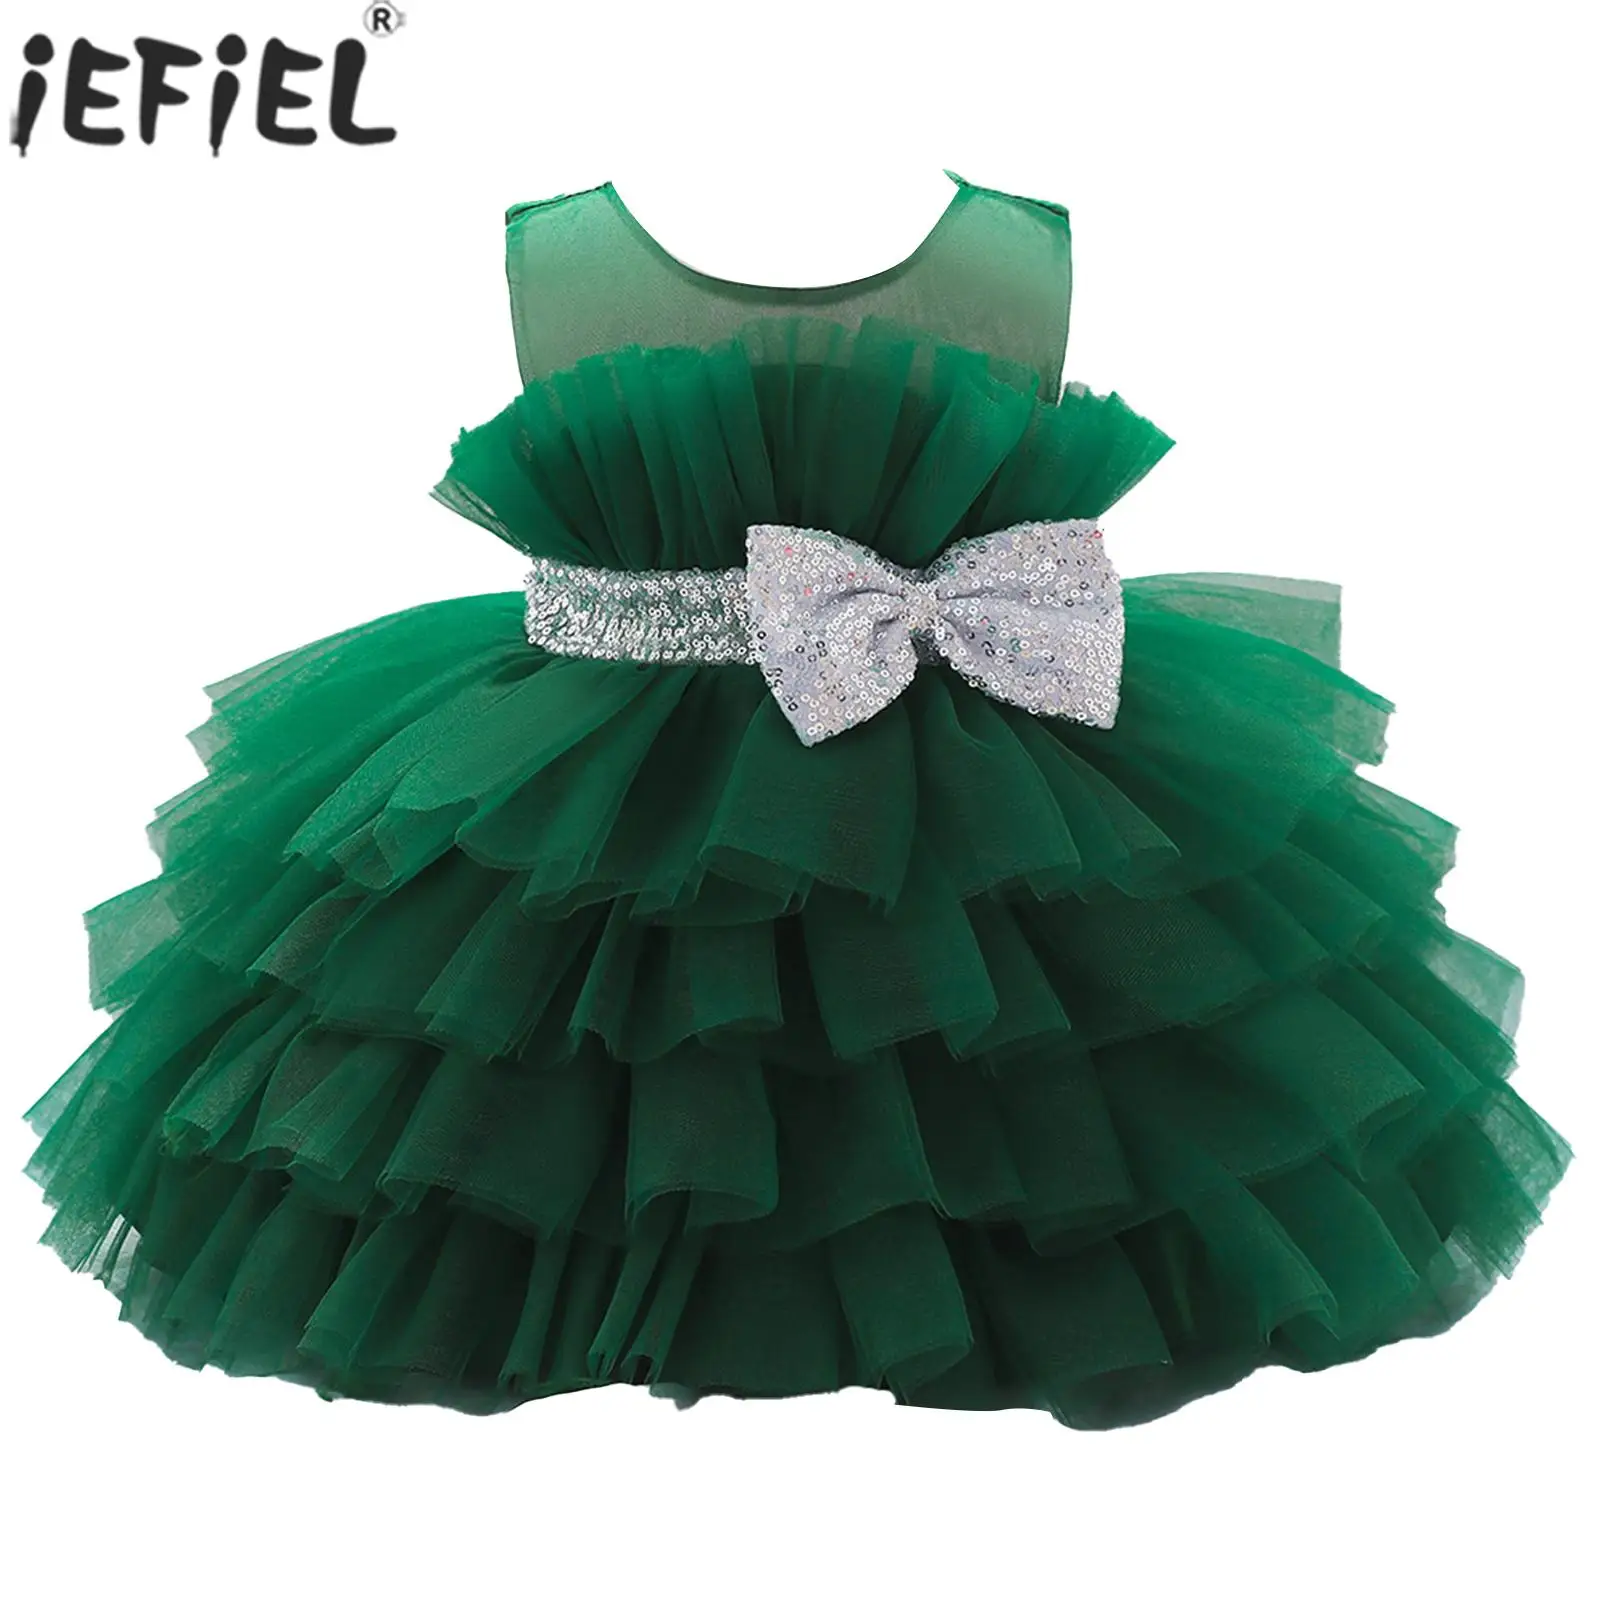 

Baby Princess Tutu Dresses Baptism Birthday Party Dress Sleeveless Sequin Bowknot Multilayer Gown for Prom Wedding Flower Girls